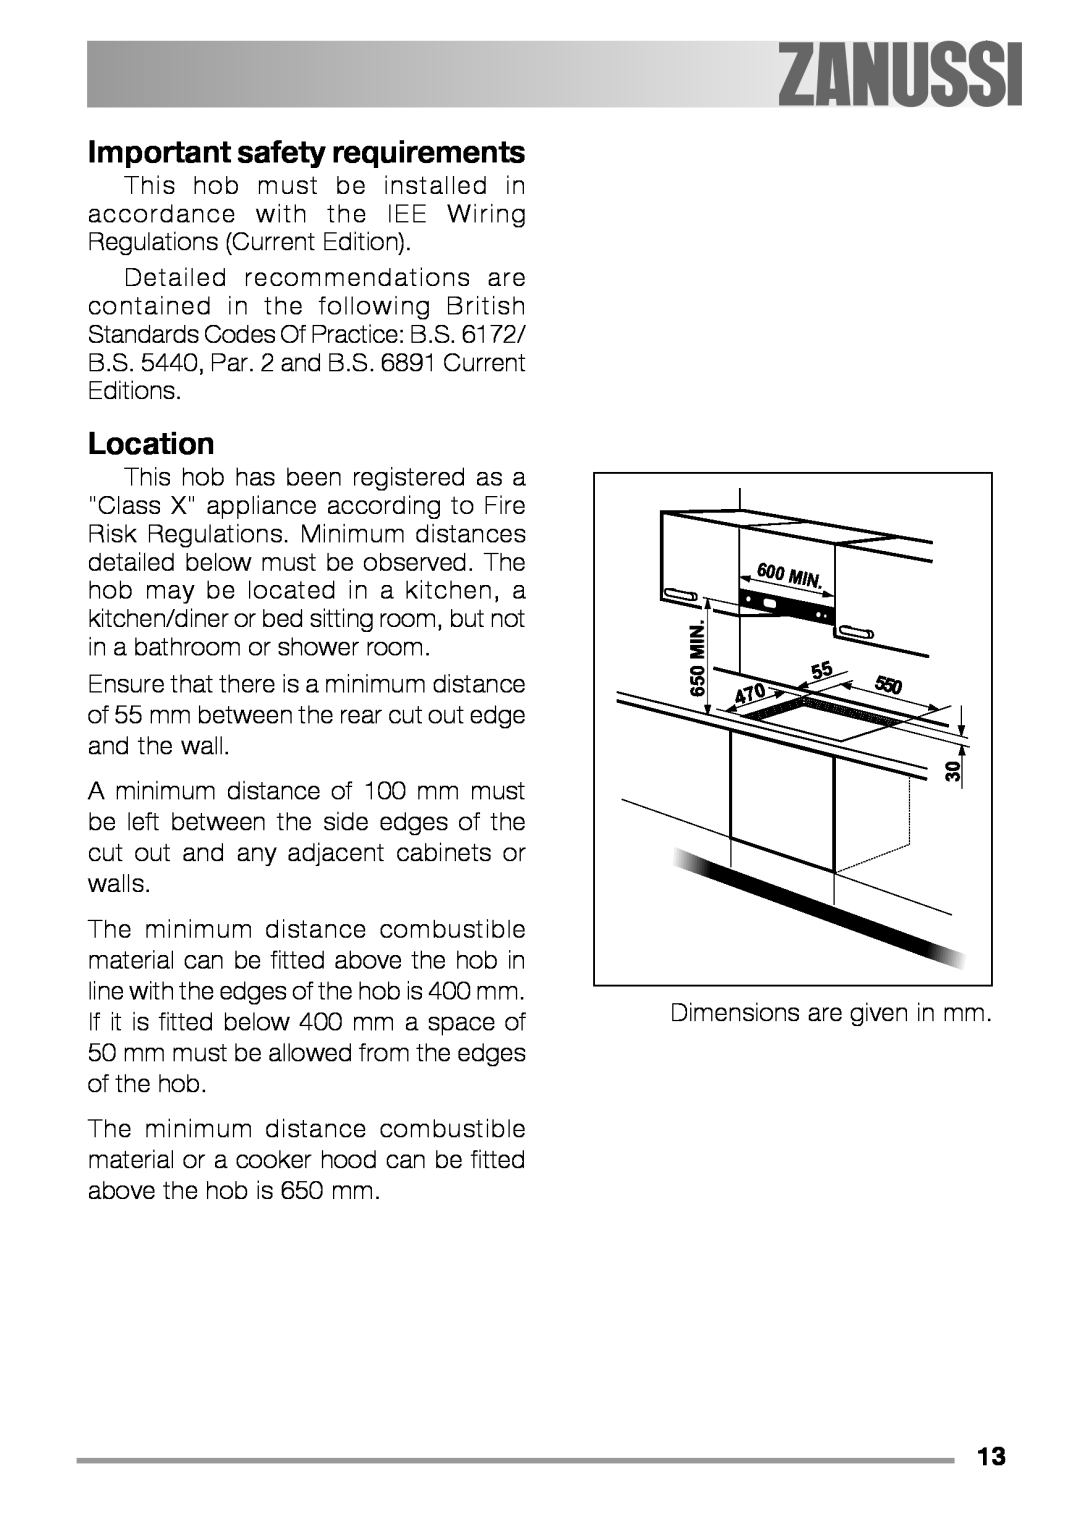 Zanussi ZEL 640 manual Important safety requirements, Location 